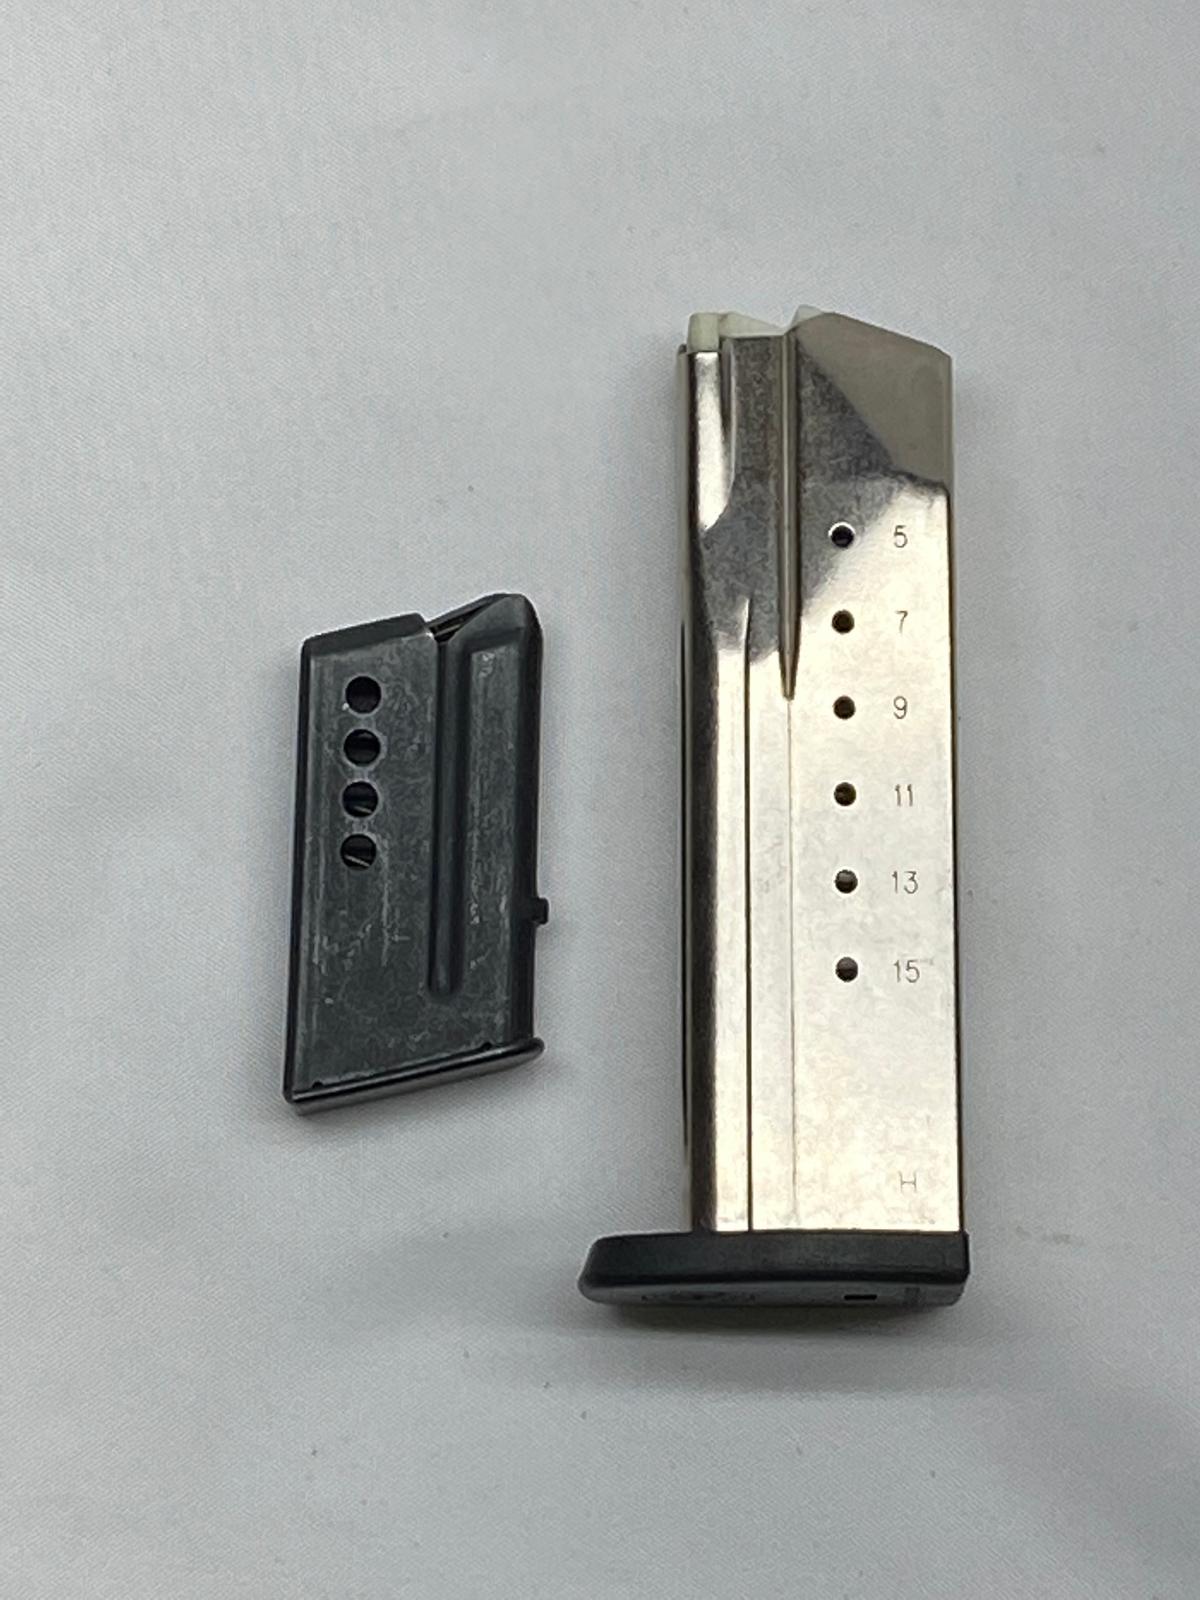 Smith & Wesson 9mm & Unmarked 22 Magazine